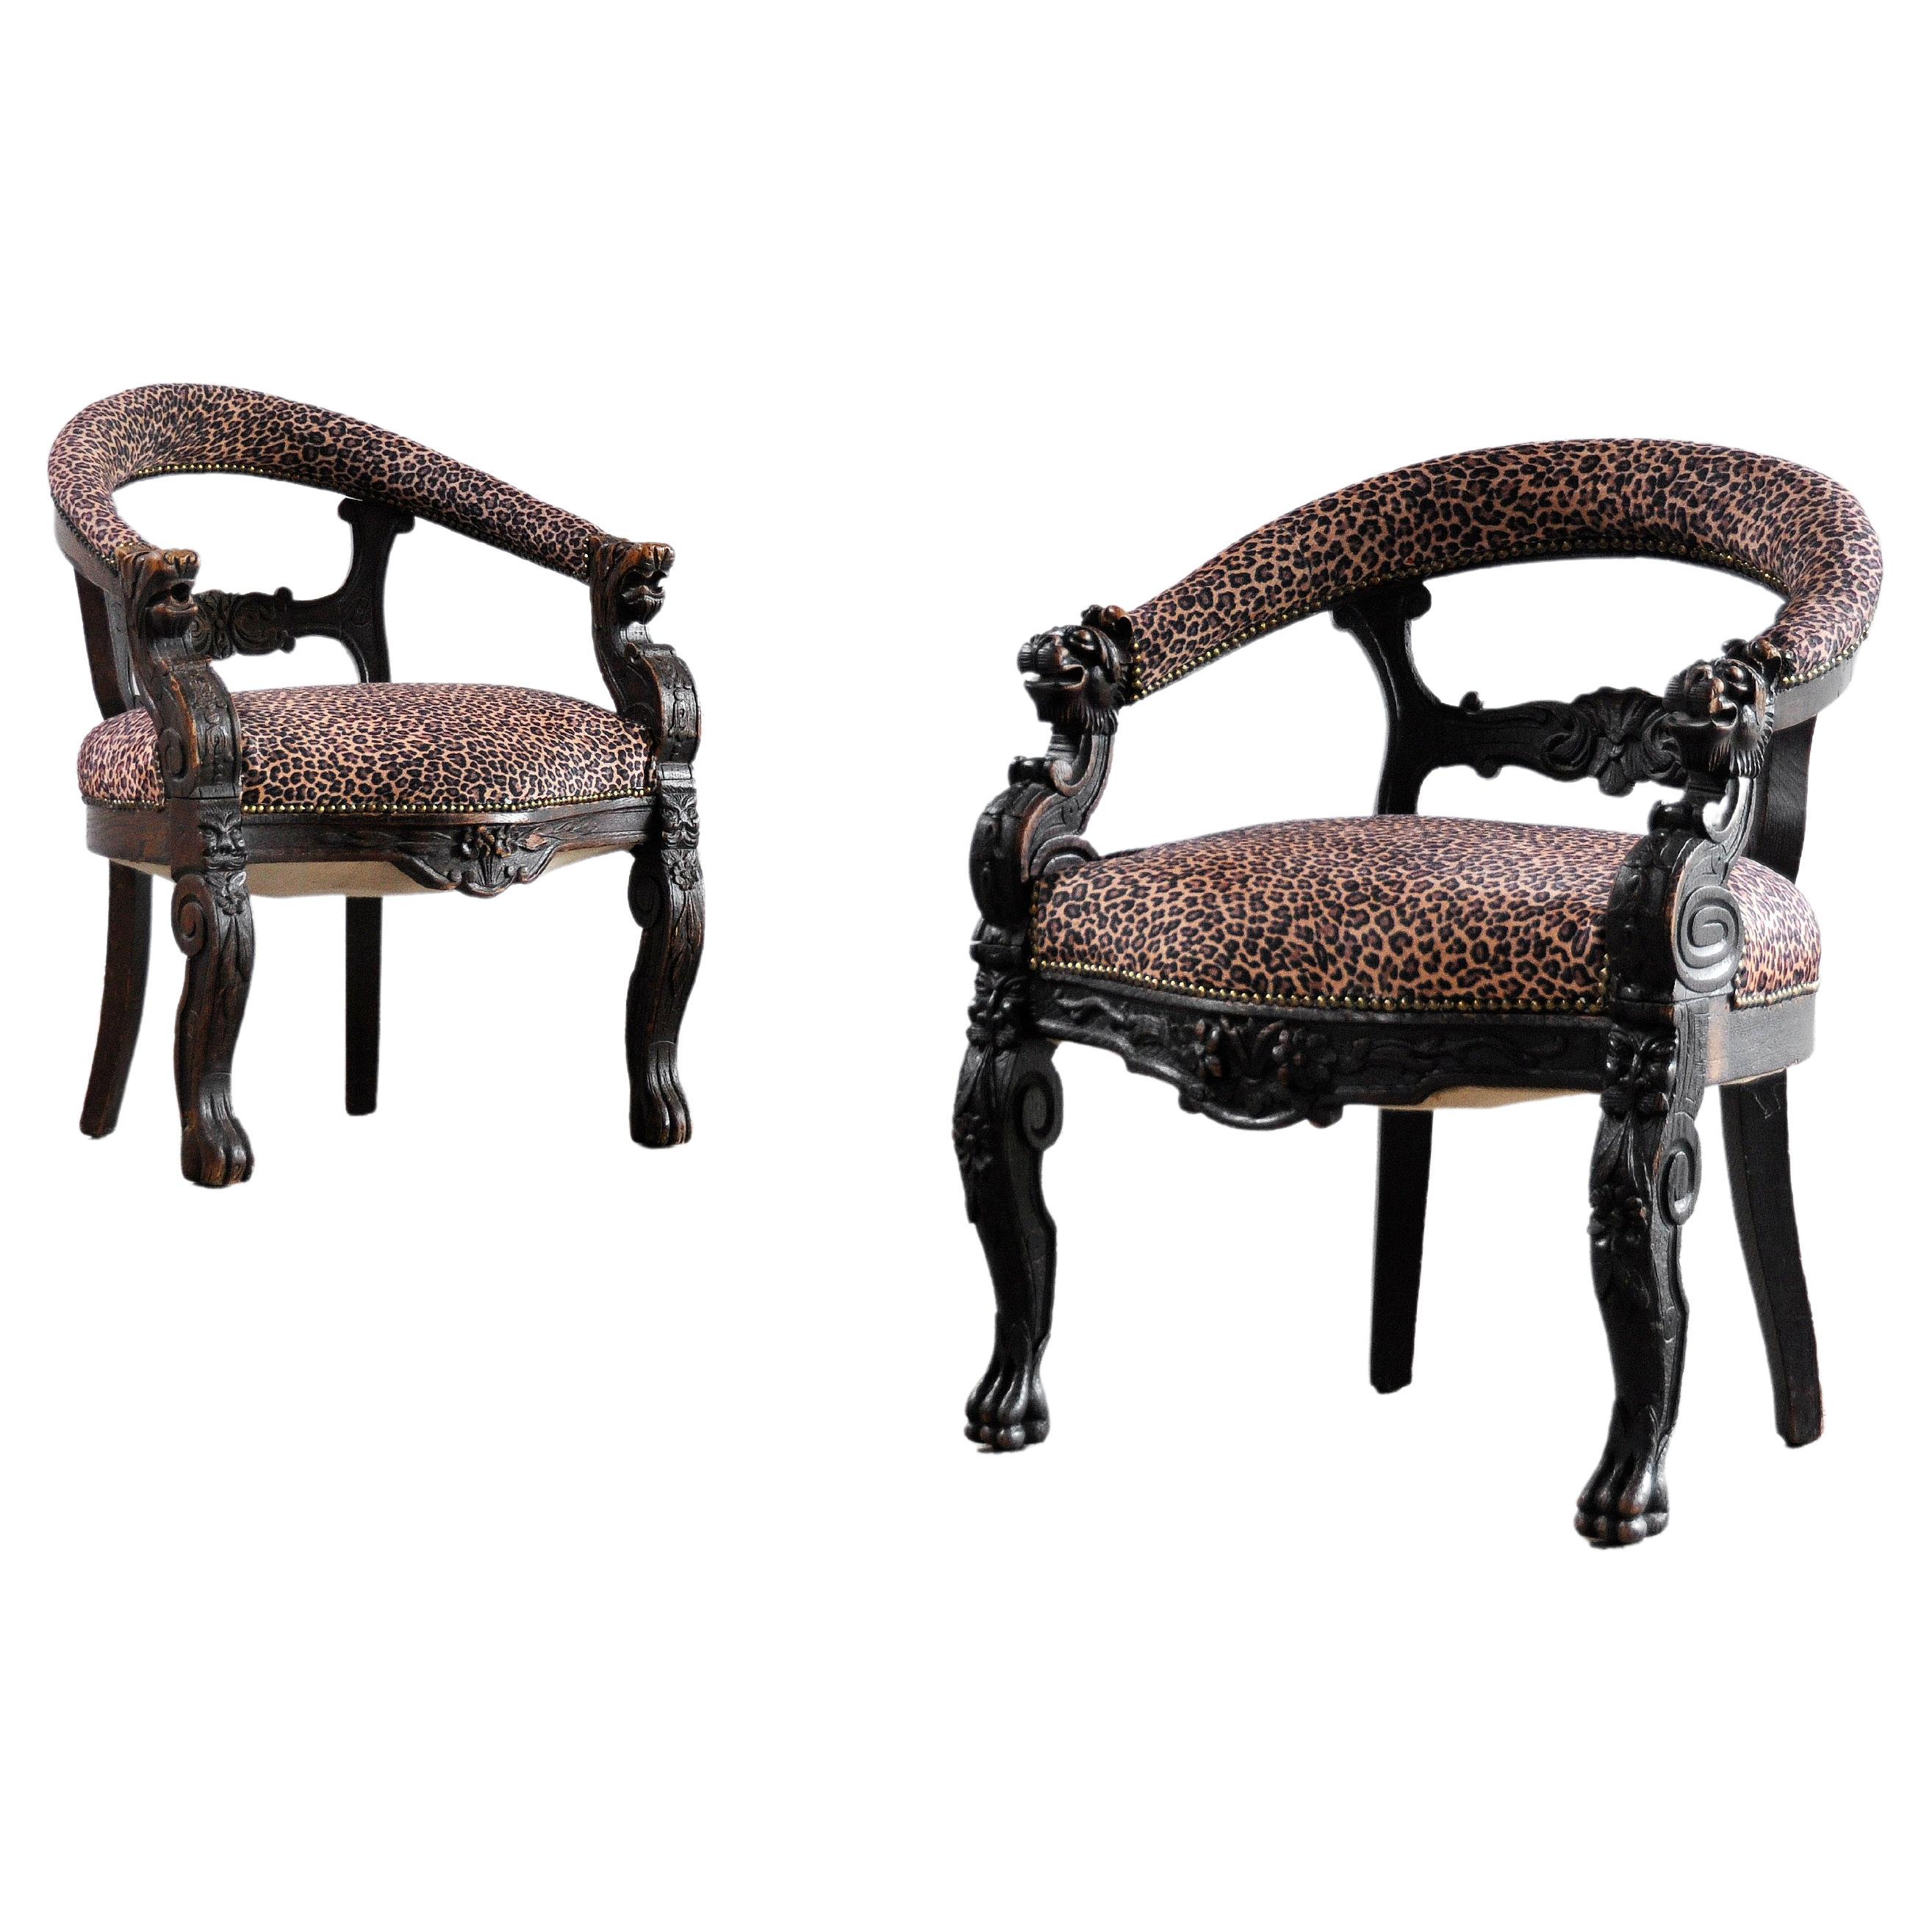 19th Century Carved Oak Tub Chairs with Leopard Print Upholstery, Set of 2